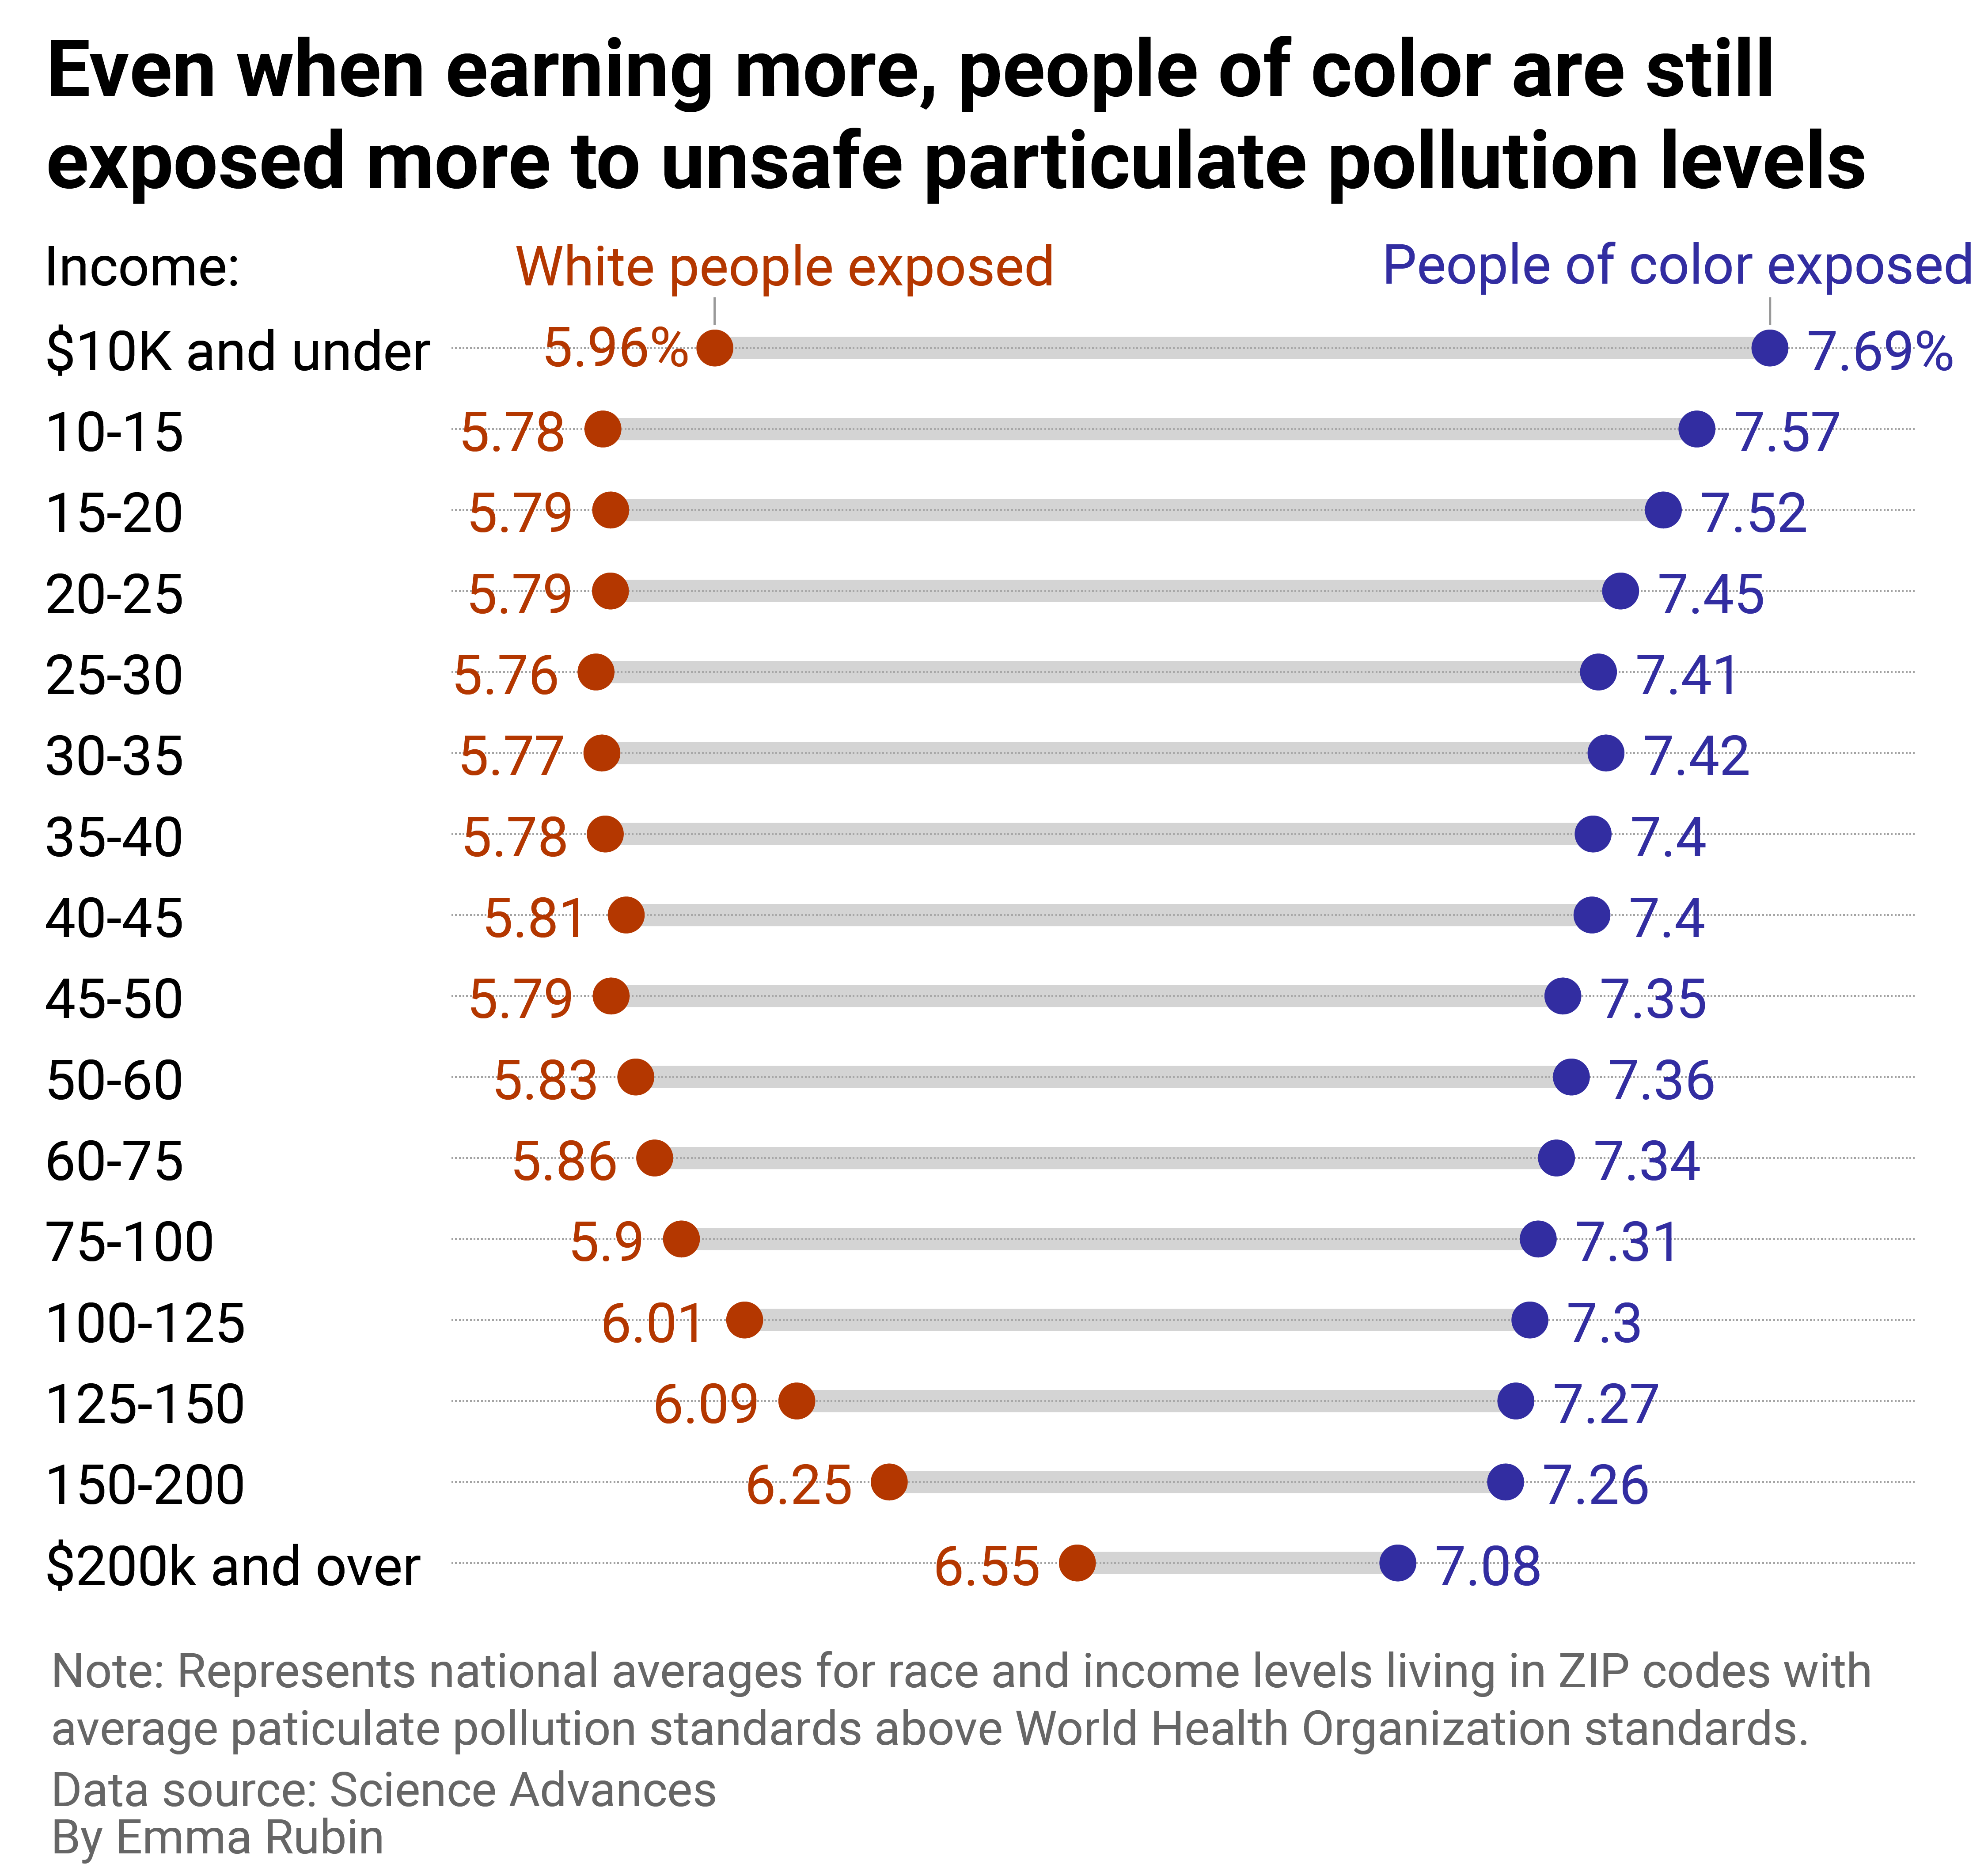 Chart showing that people of color are more likely to be exposed to particulate pollution than white people across all income levels.